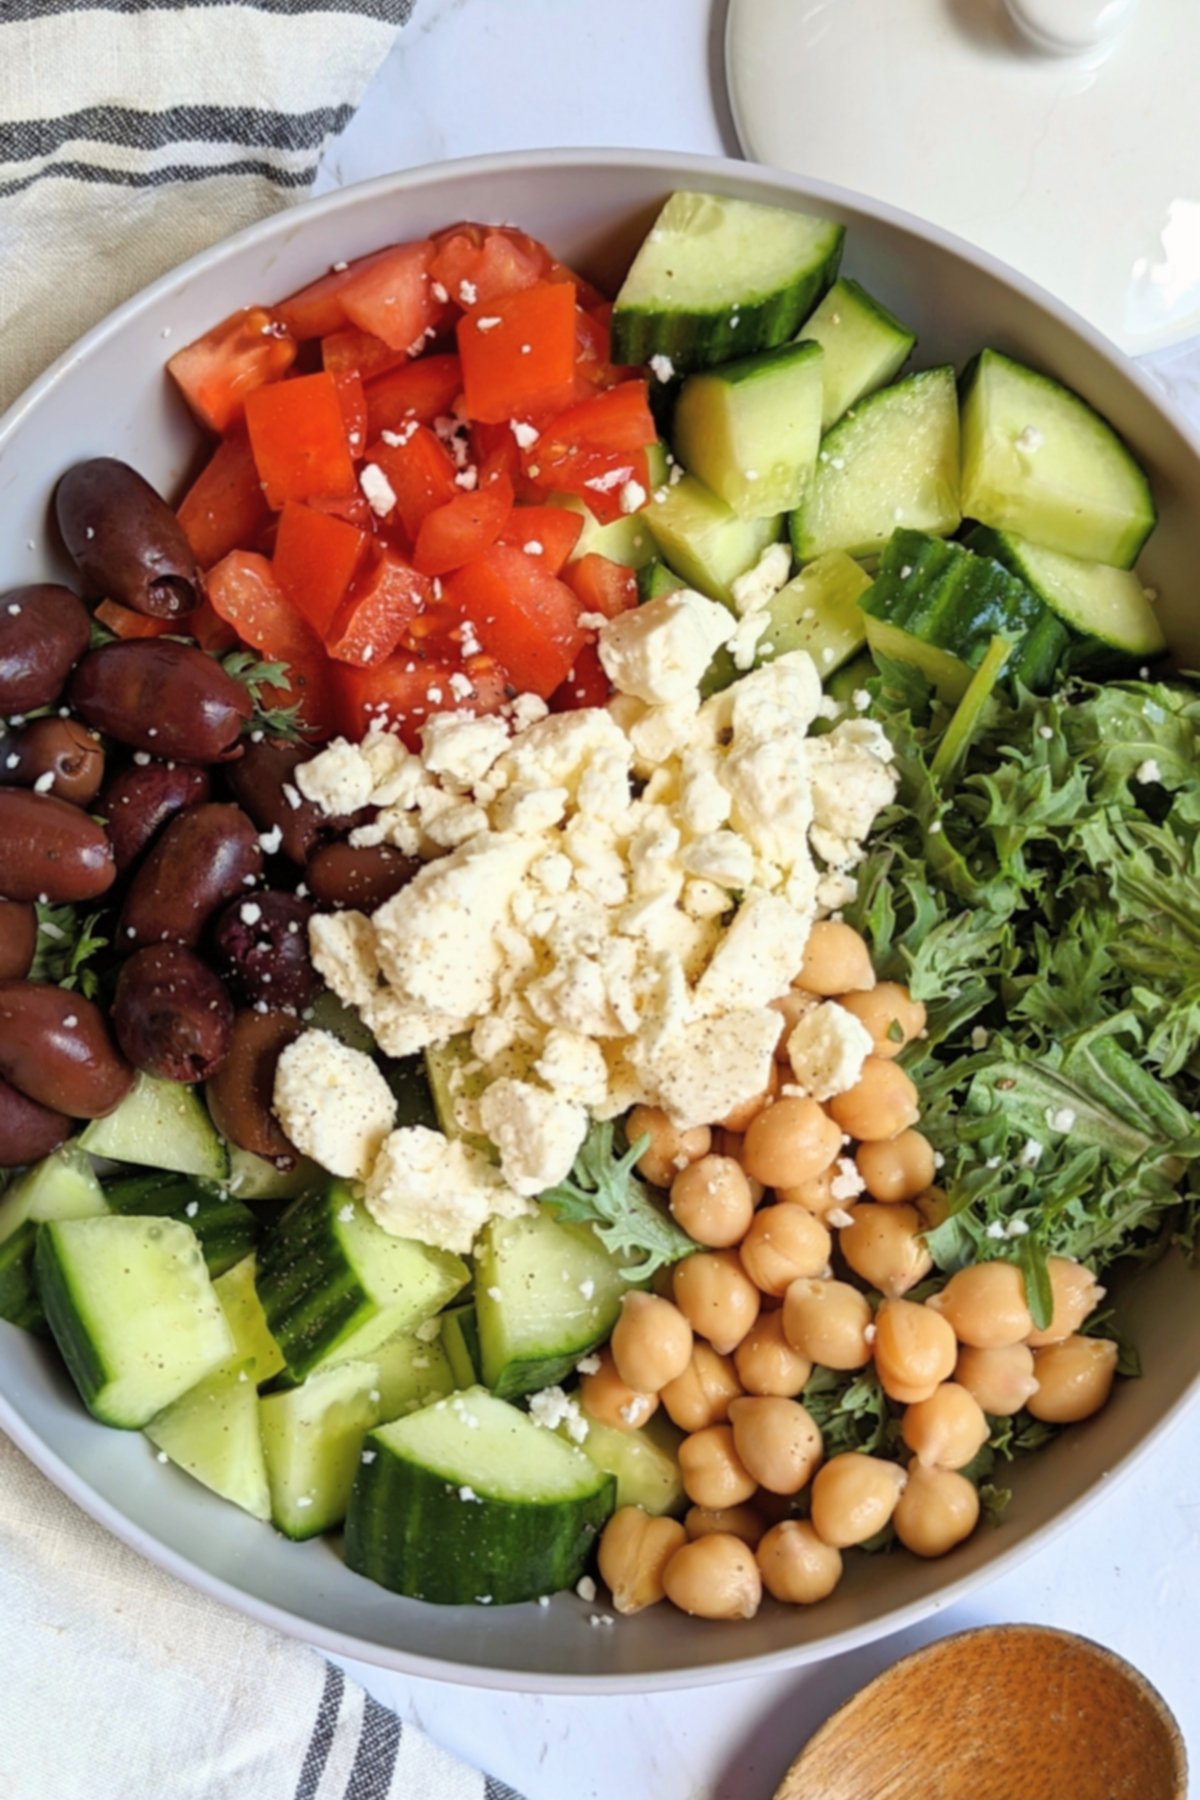 tomato cucumber feta salad with chickpeas kale or spinach and kalamata olives vegetarian gluten free easy lunches filling salad recipes